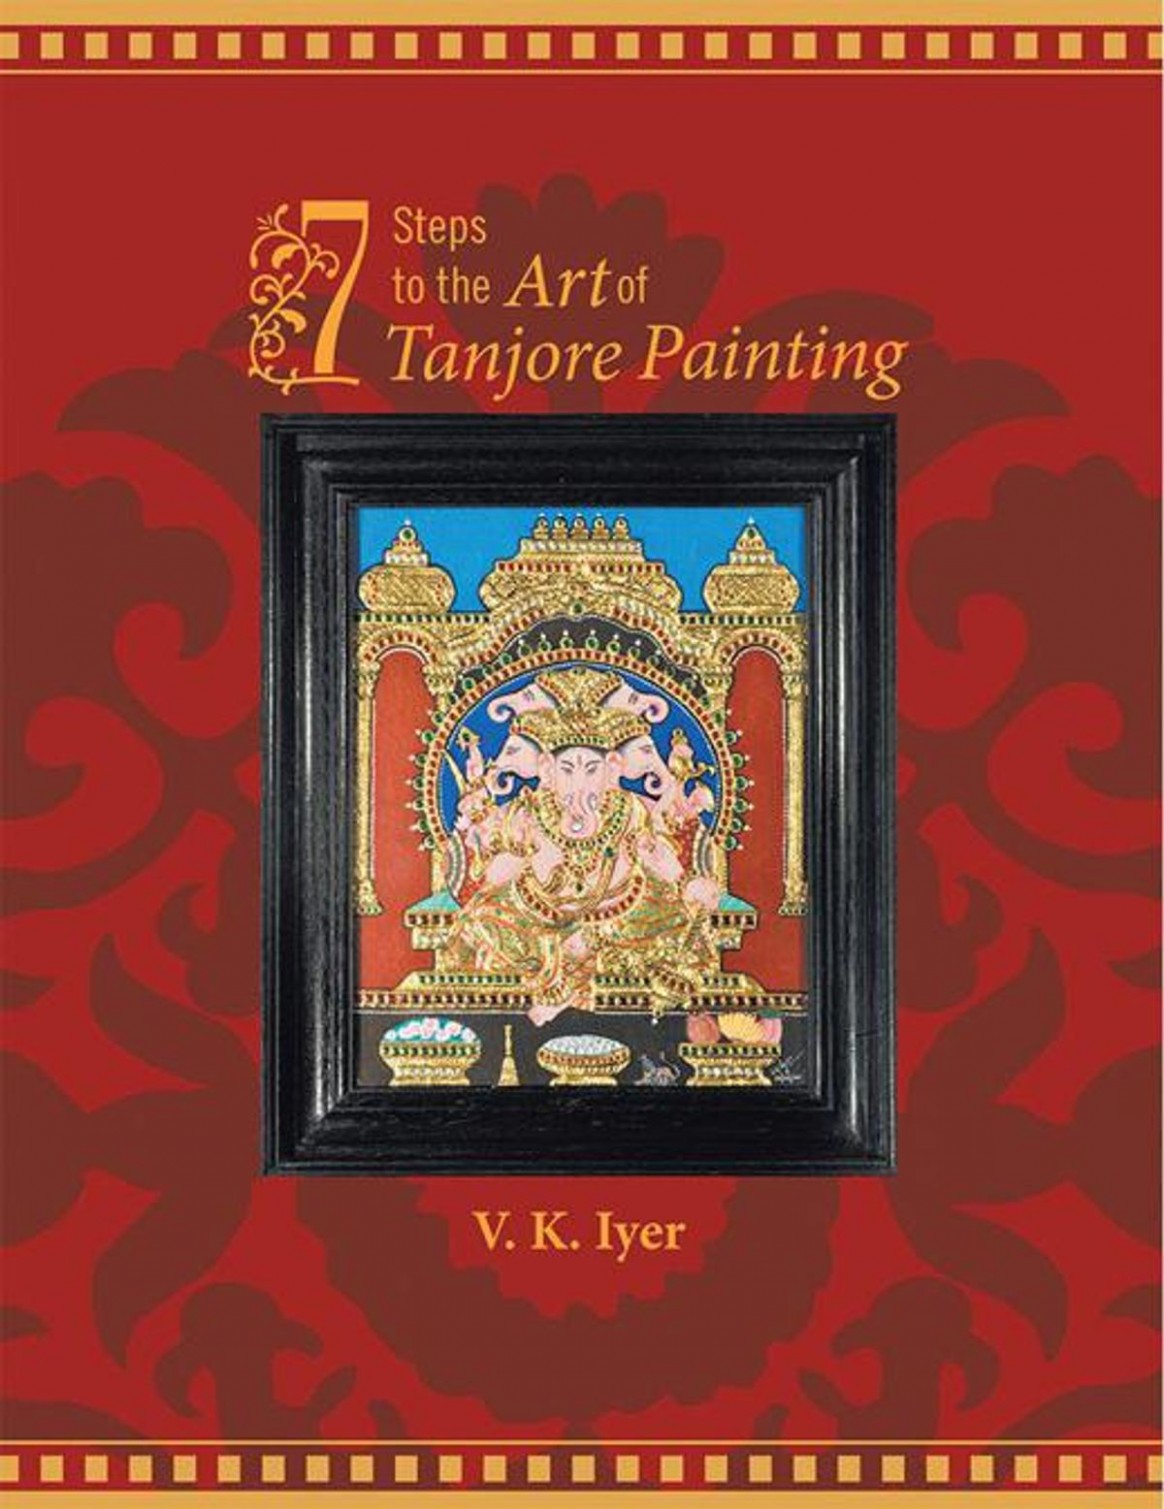 5 Steps To The Art Of Tanjore Painting Ebook By V. K